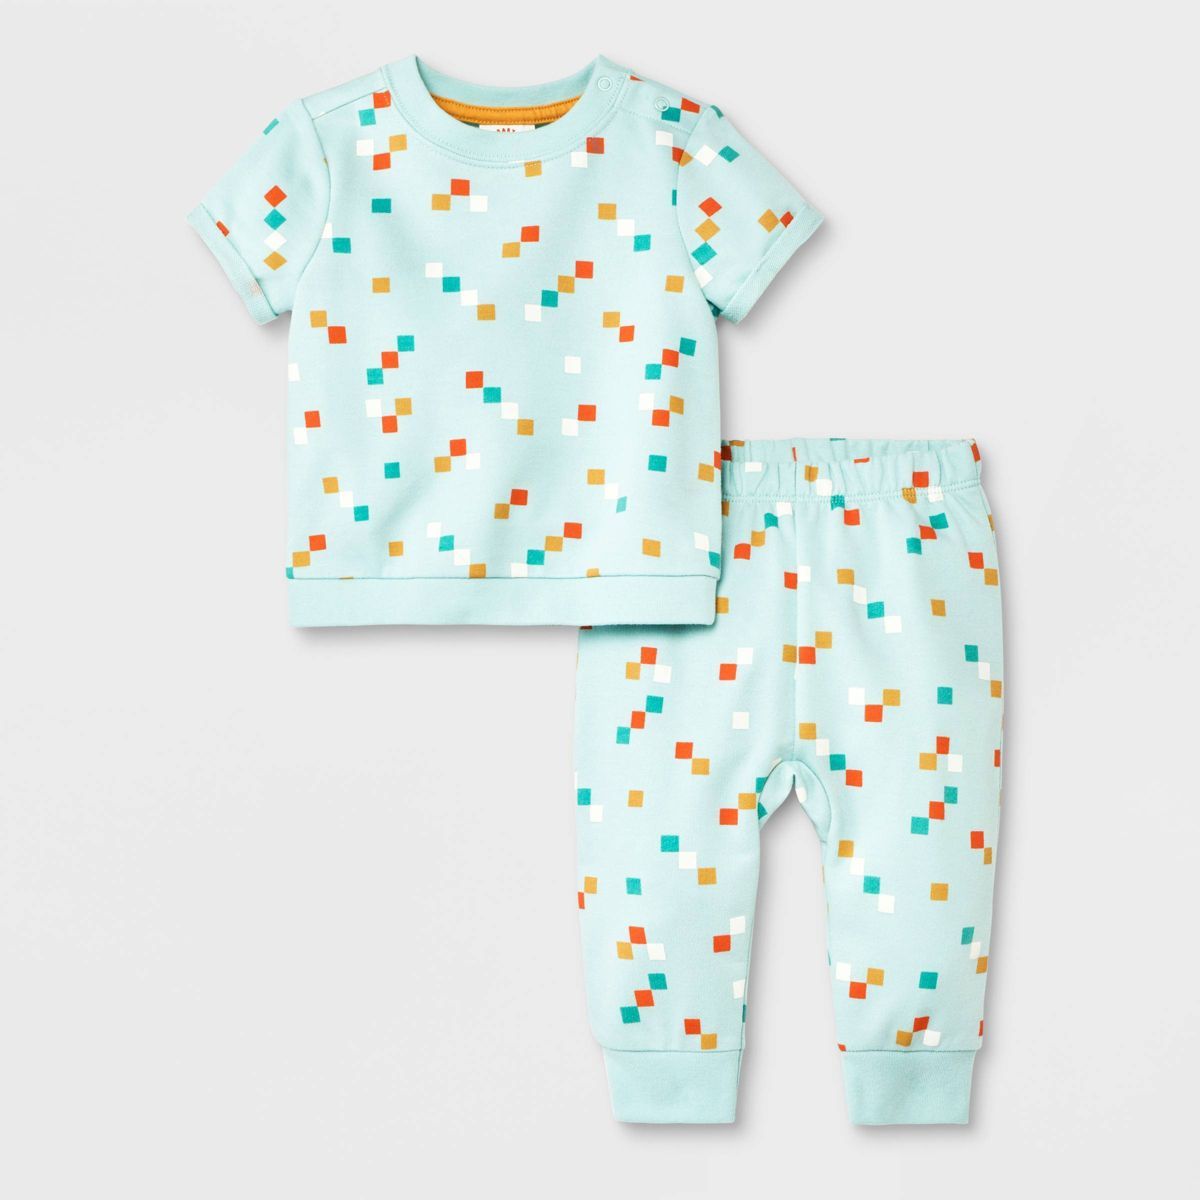 Baby 2pc French Terry Short Sleeve Top & Bottom Set - Cat & Jack™ Turquoise Green | Target